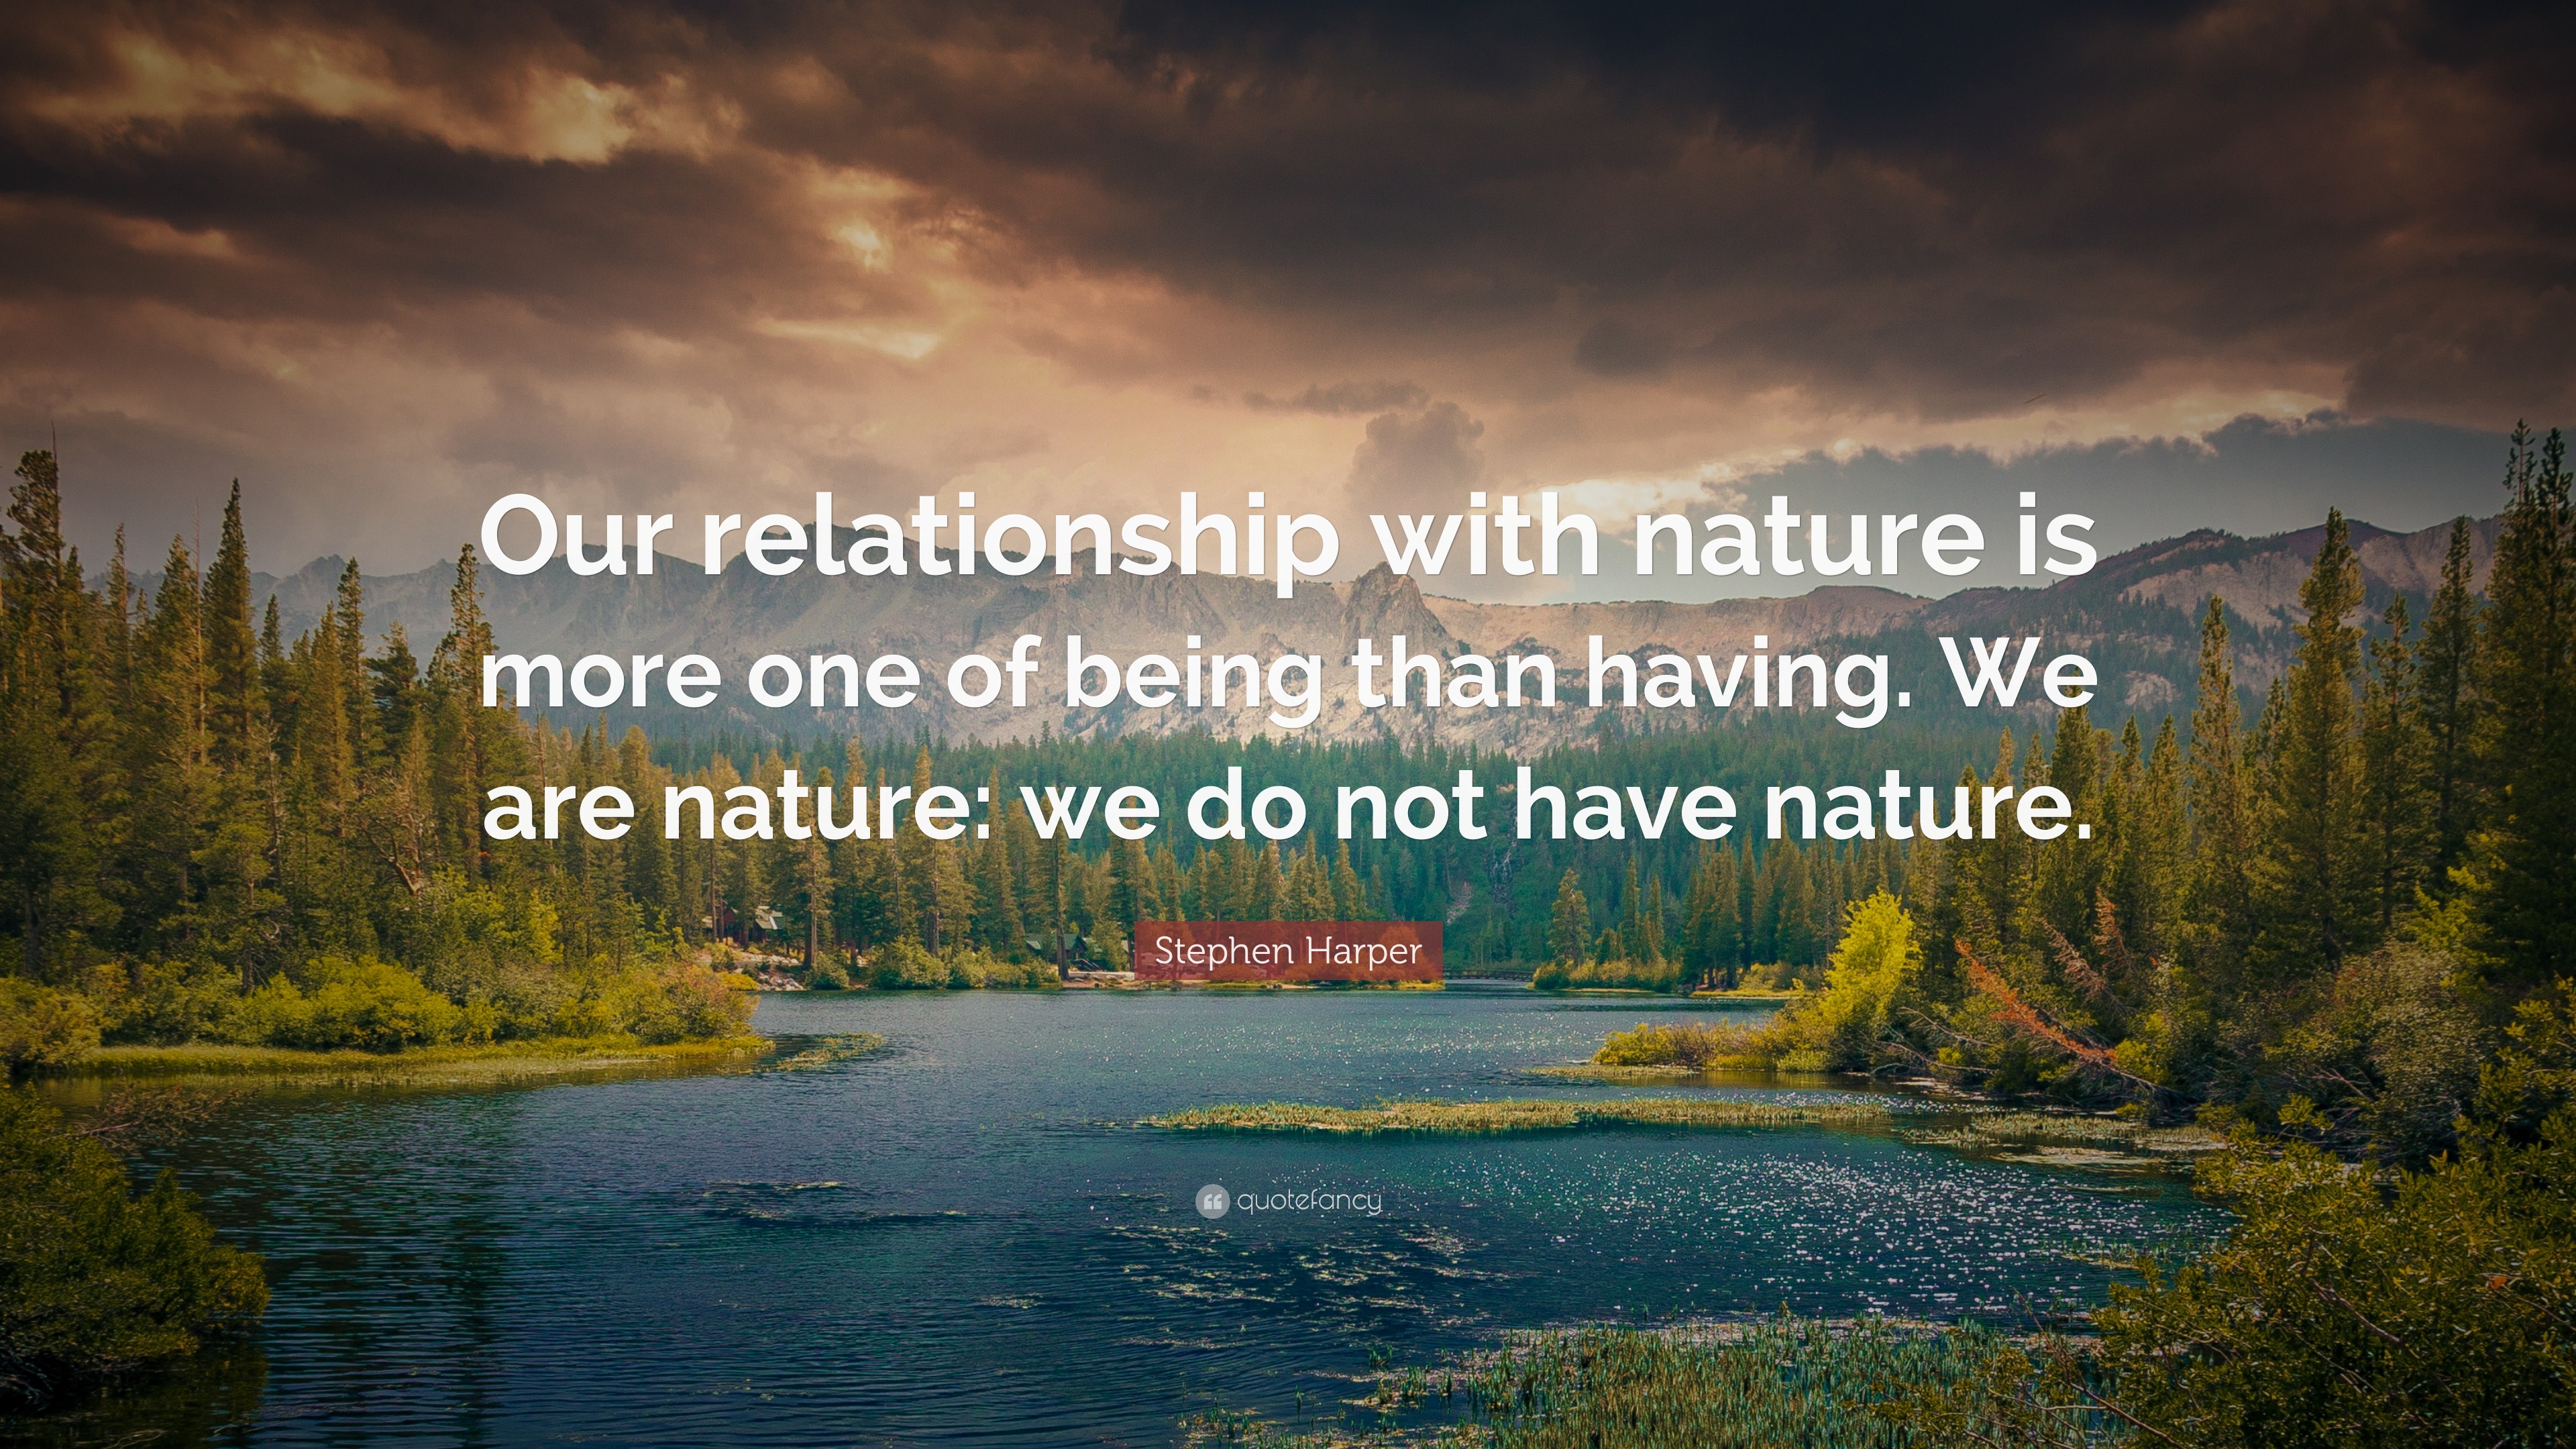 Stephen Harper Quote: “Our relationship with nature is more one of